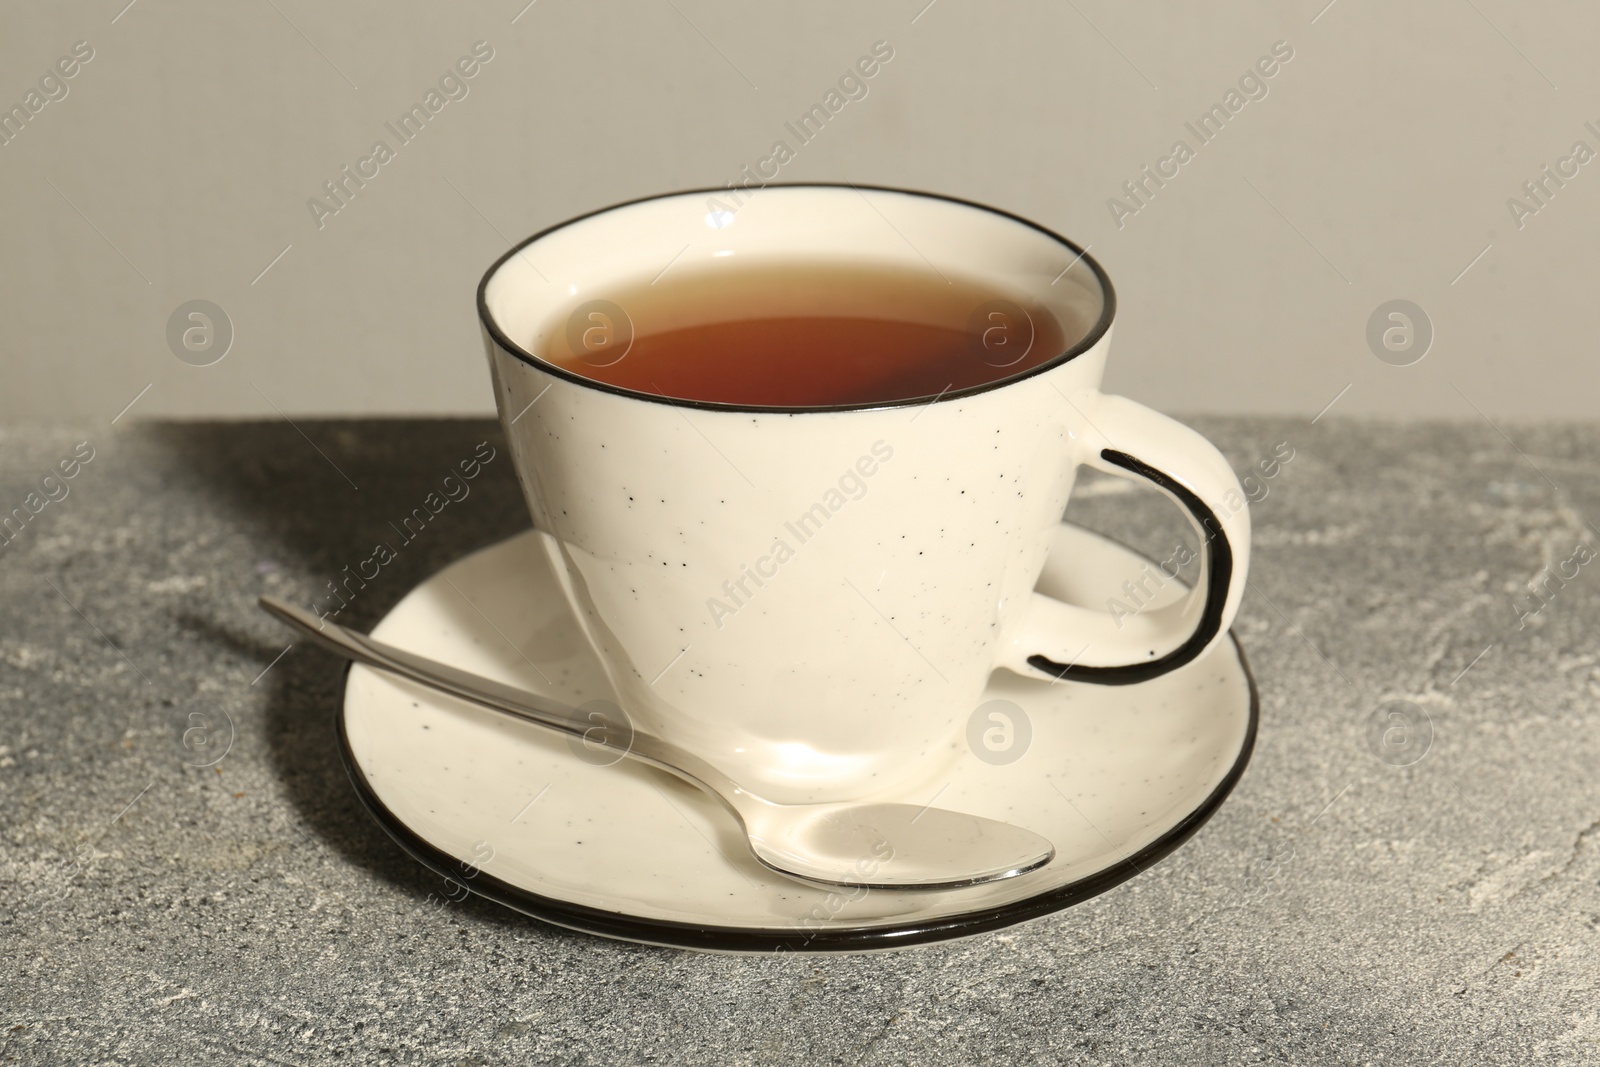 Photo of Aromatic tea in cup and spoon on grey table